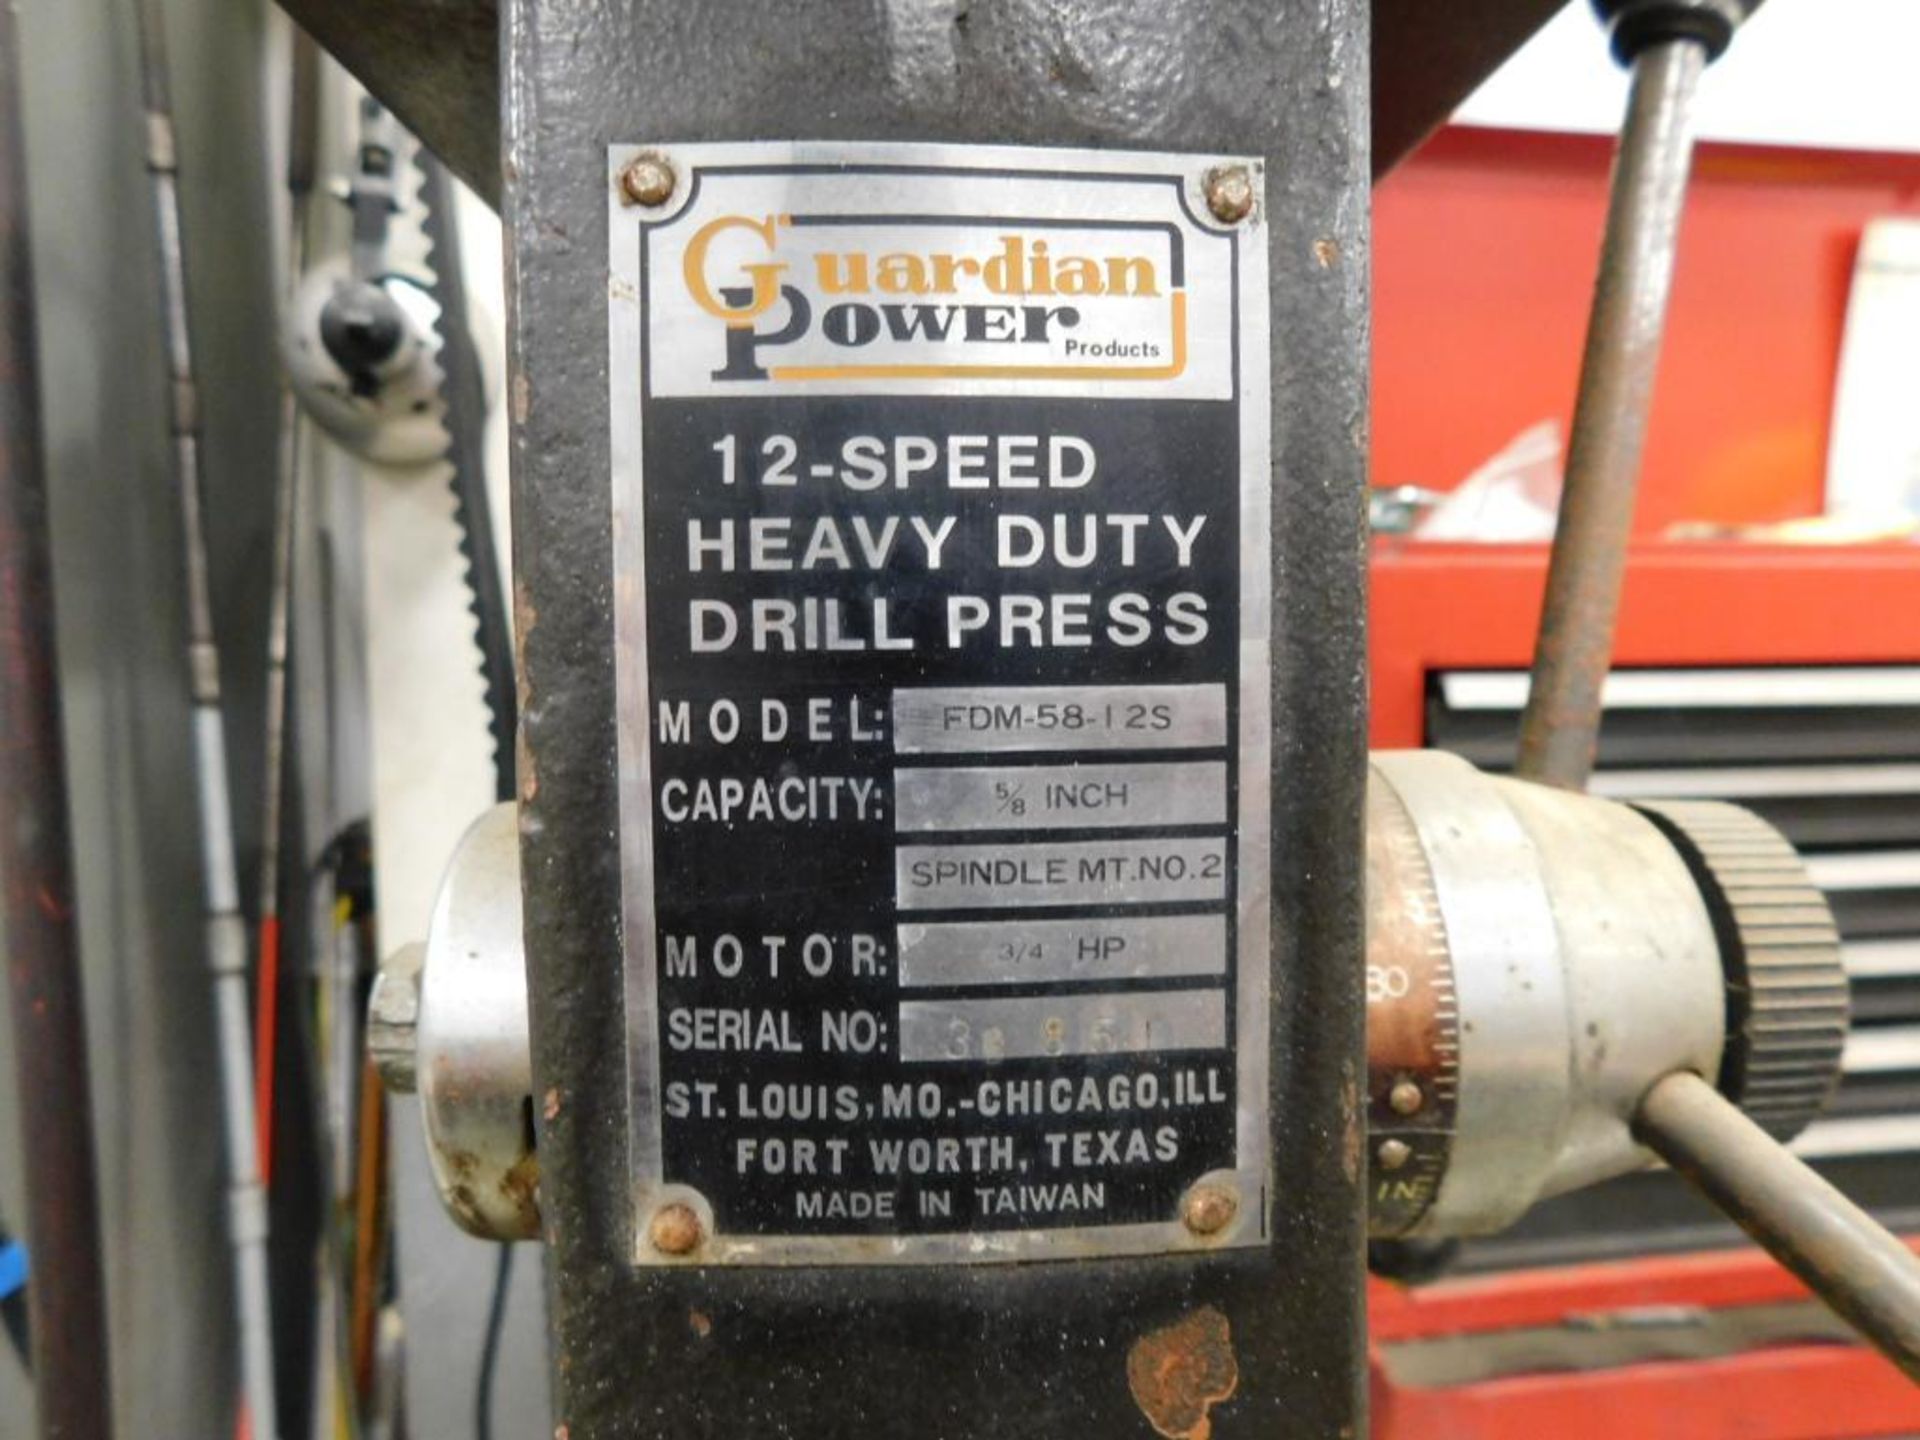 Guardian Power FDM-58-12S 5/8" 3/4 HP Drill Press, S/N 33851, 11" Dia. Table, 7" Throat - Image 4 of 4